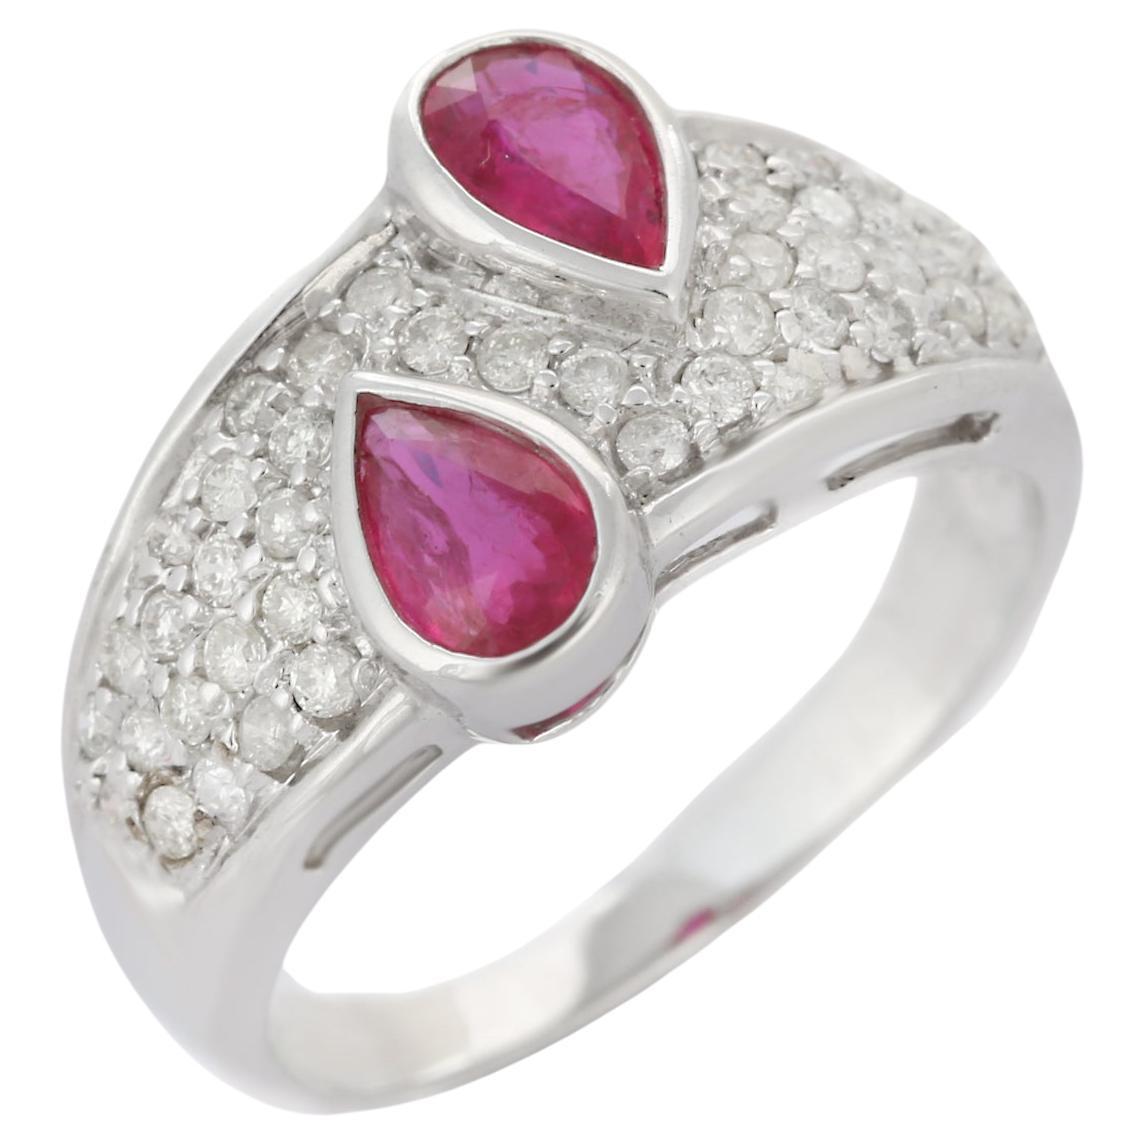 Pear Cut Ruby and Diamond Cocktail Wedding Ring in 18K White Gold 